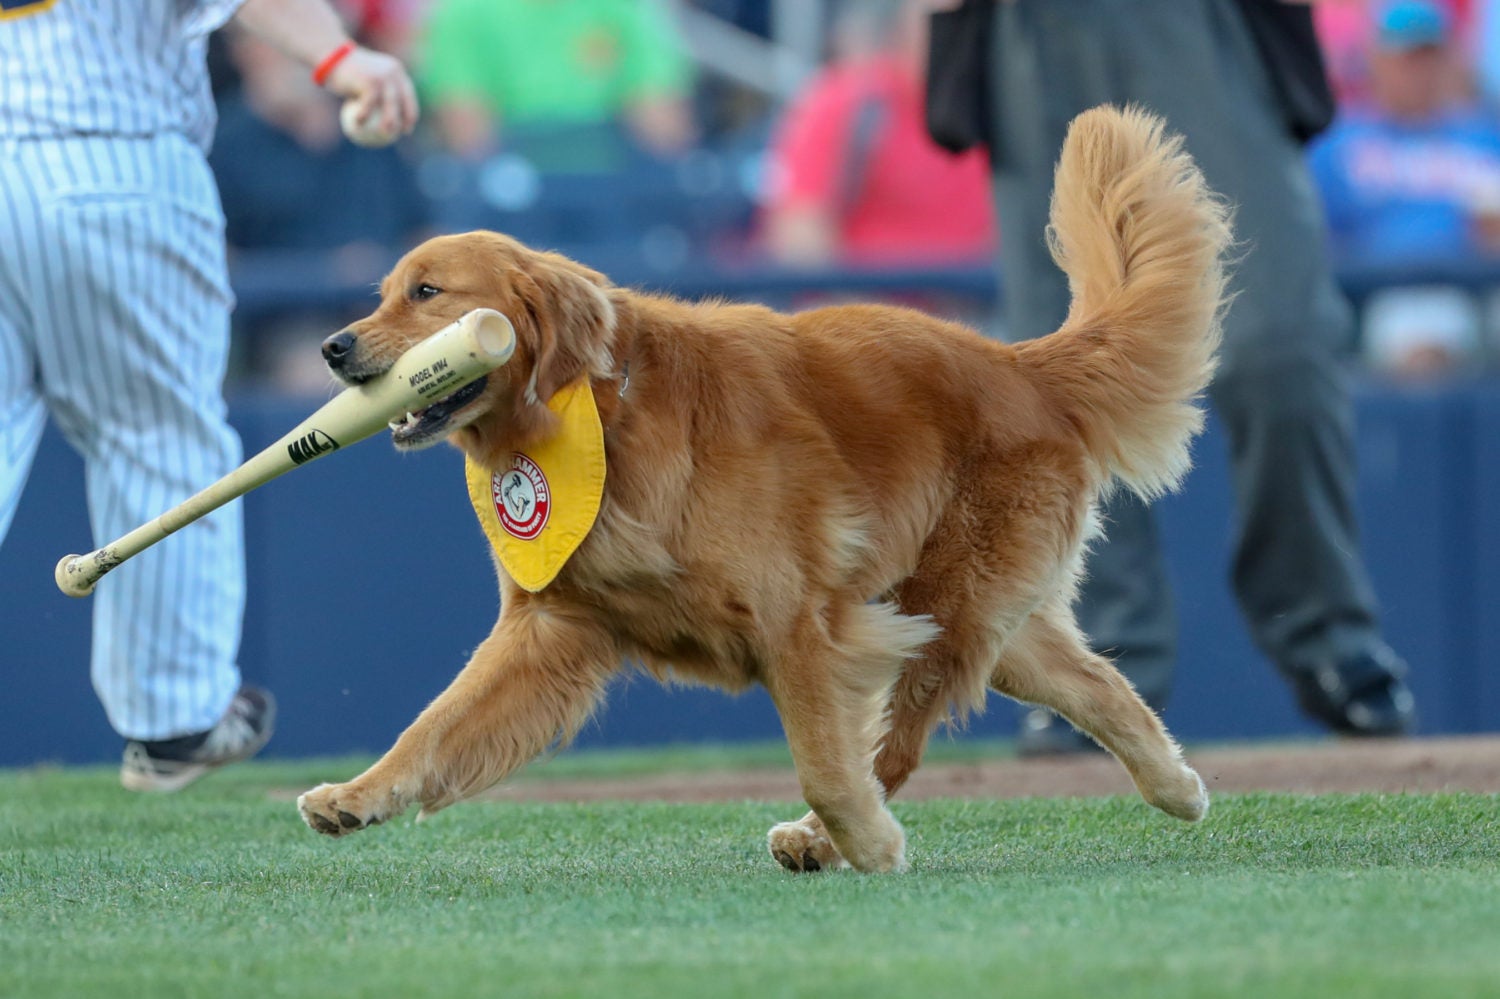 Meet the Baseball Dogs The Team Bat Dogs and Entertainers of Baseball